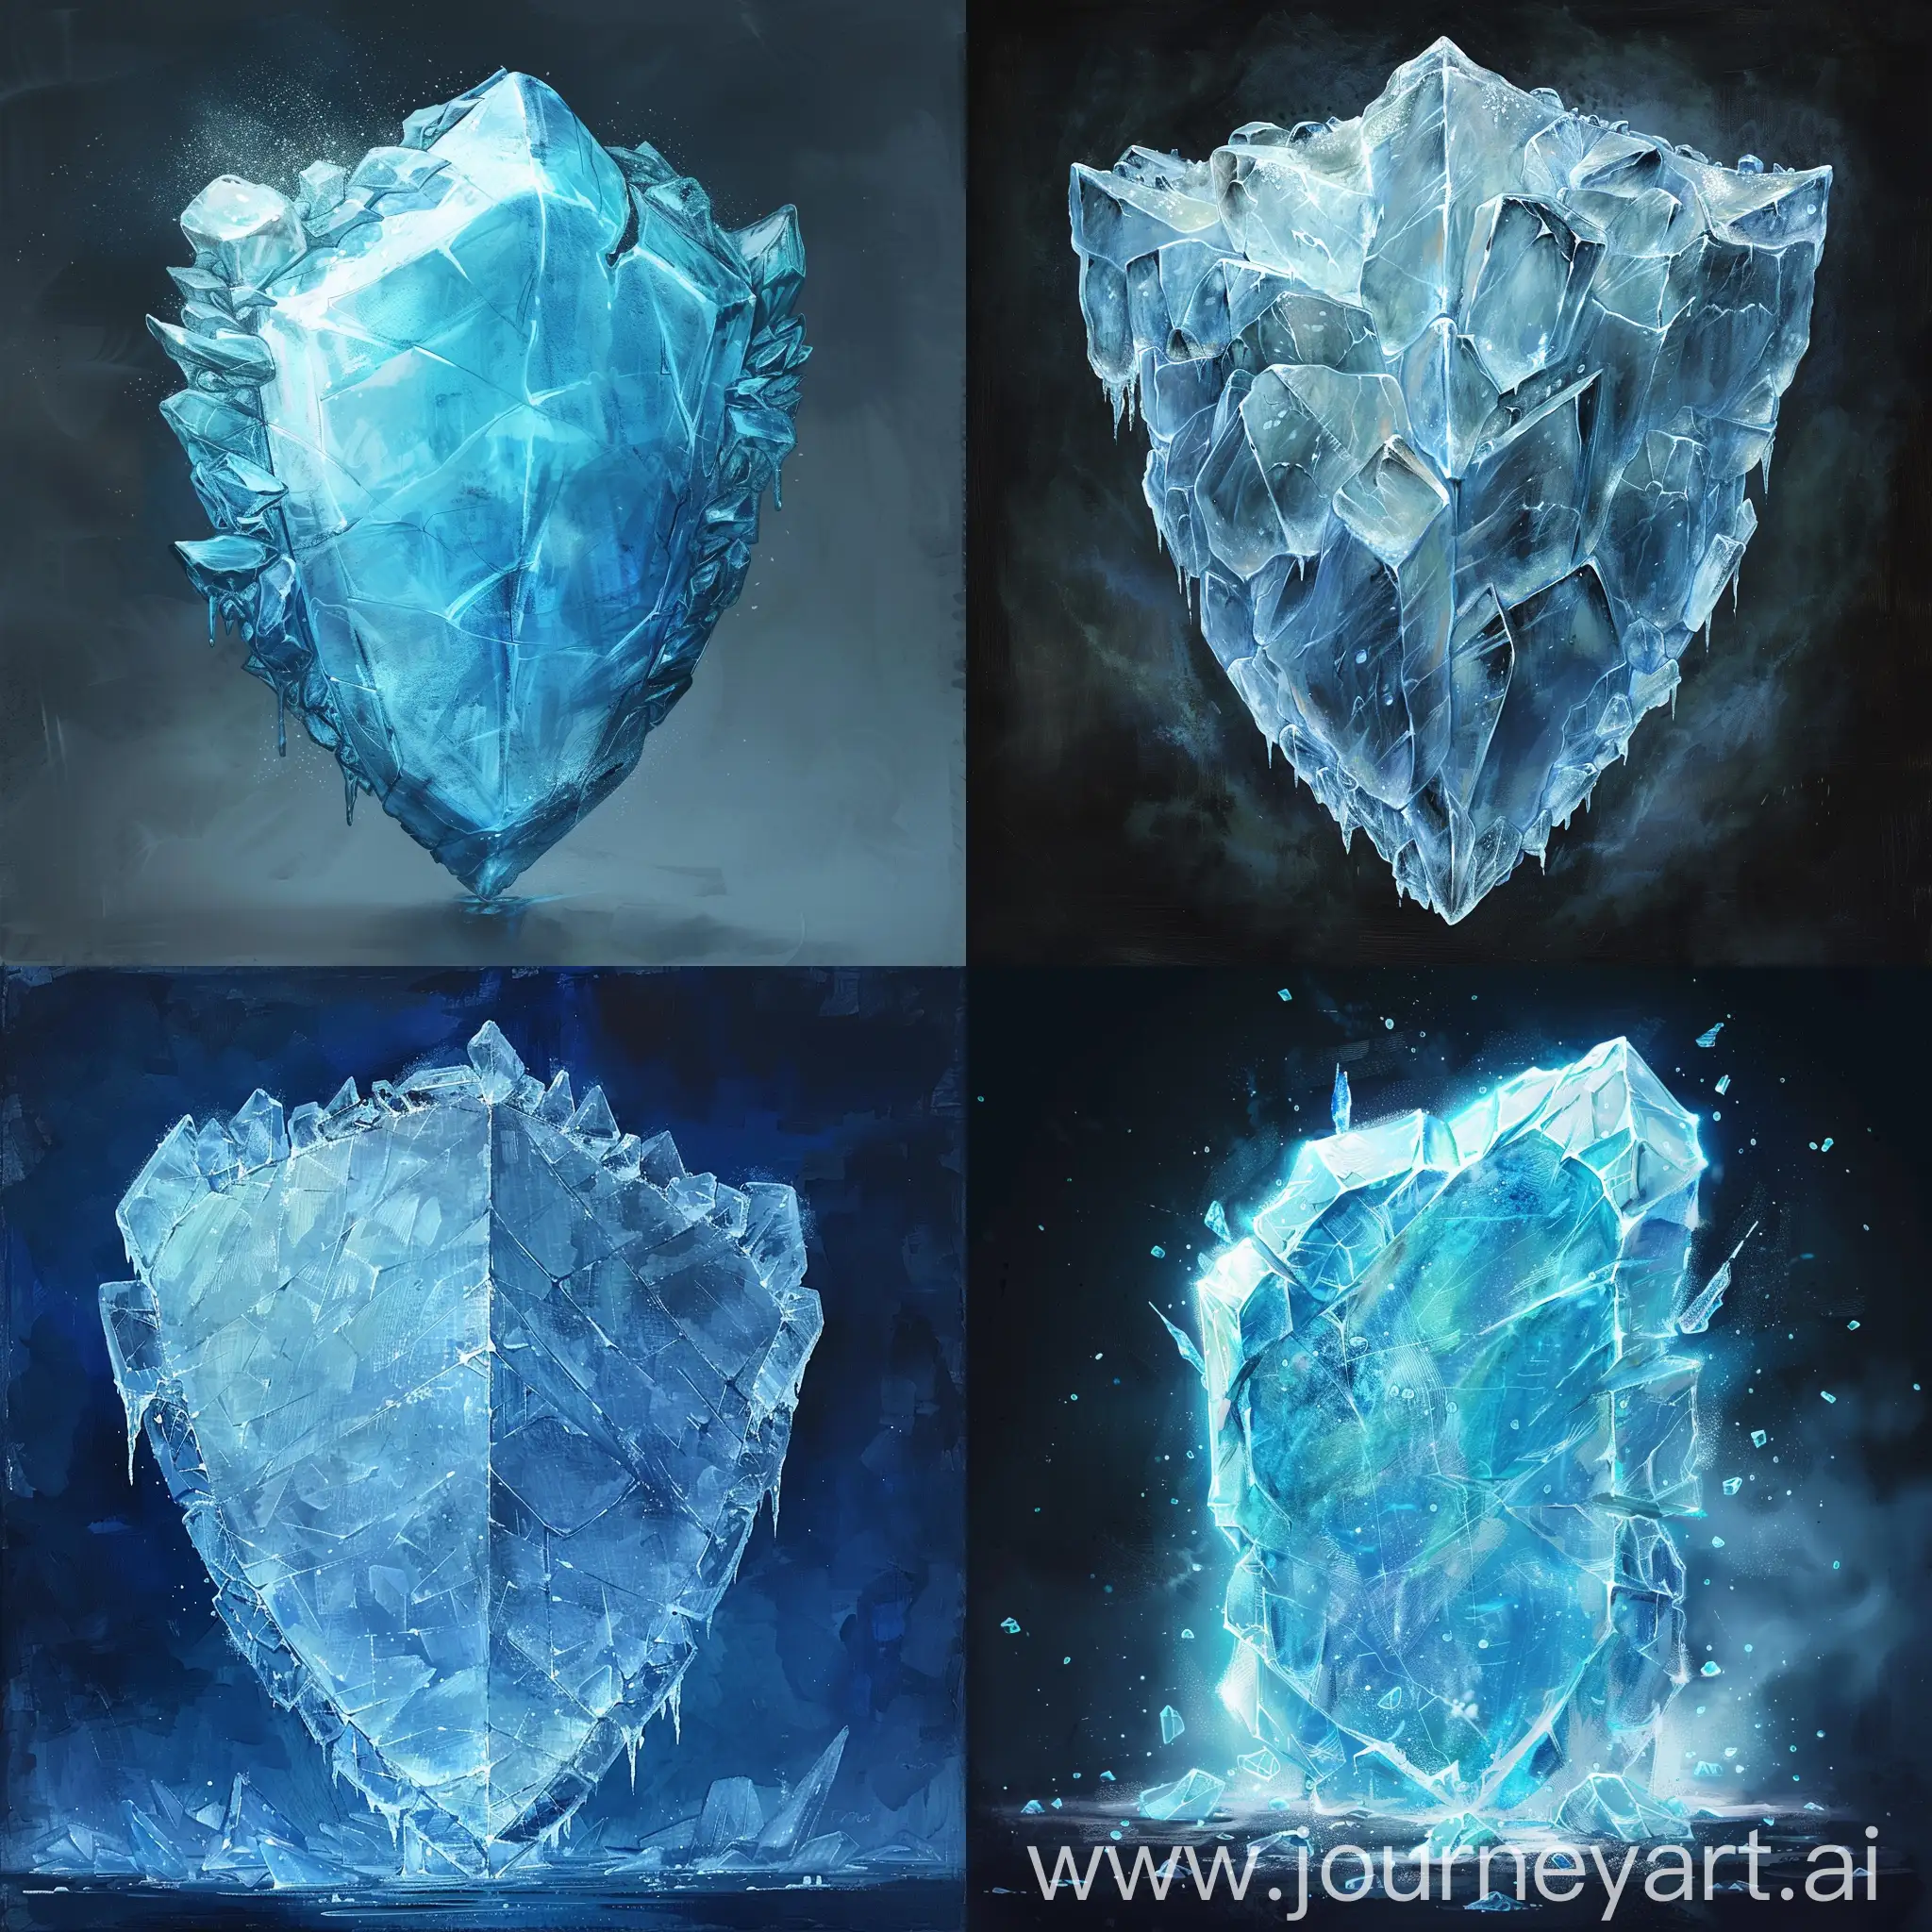 Magic shield made of ice with no background.
In the art style of Terese Nielsen oil painting.